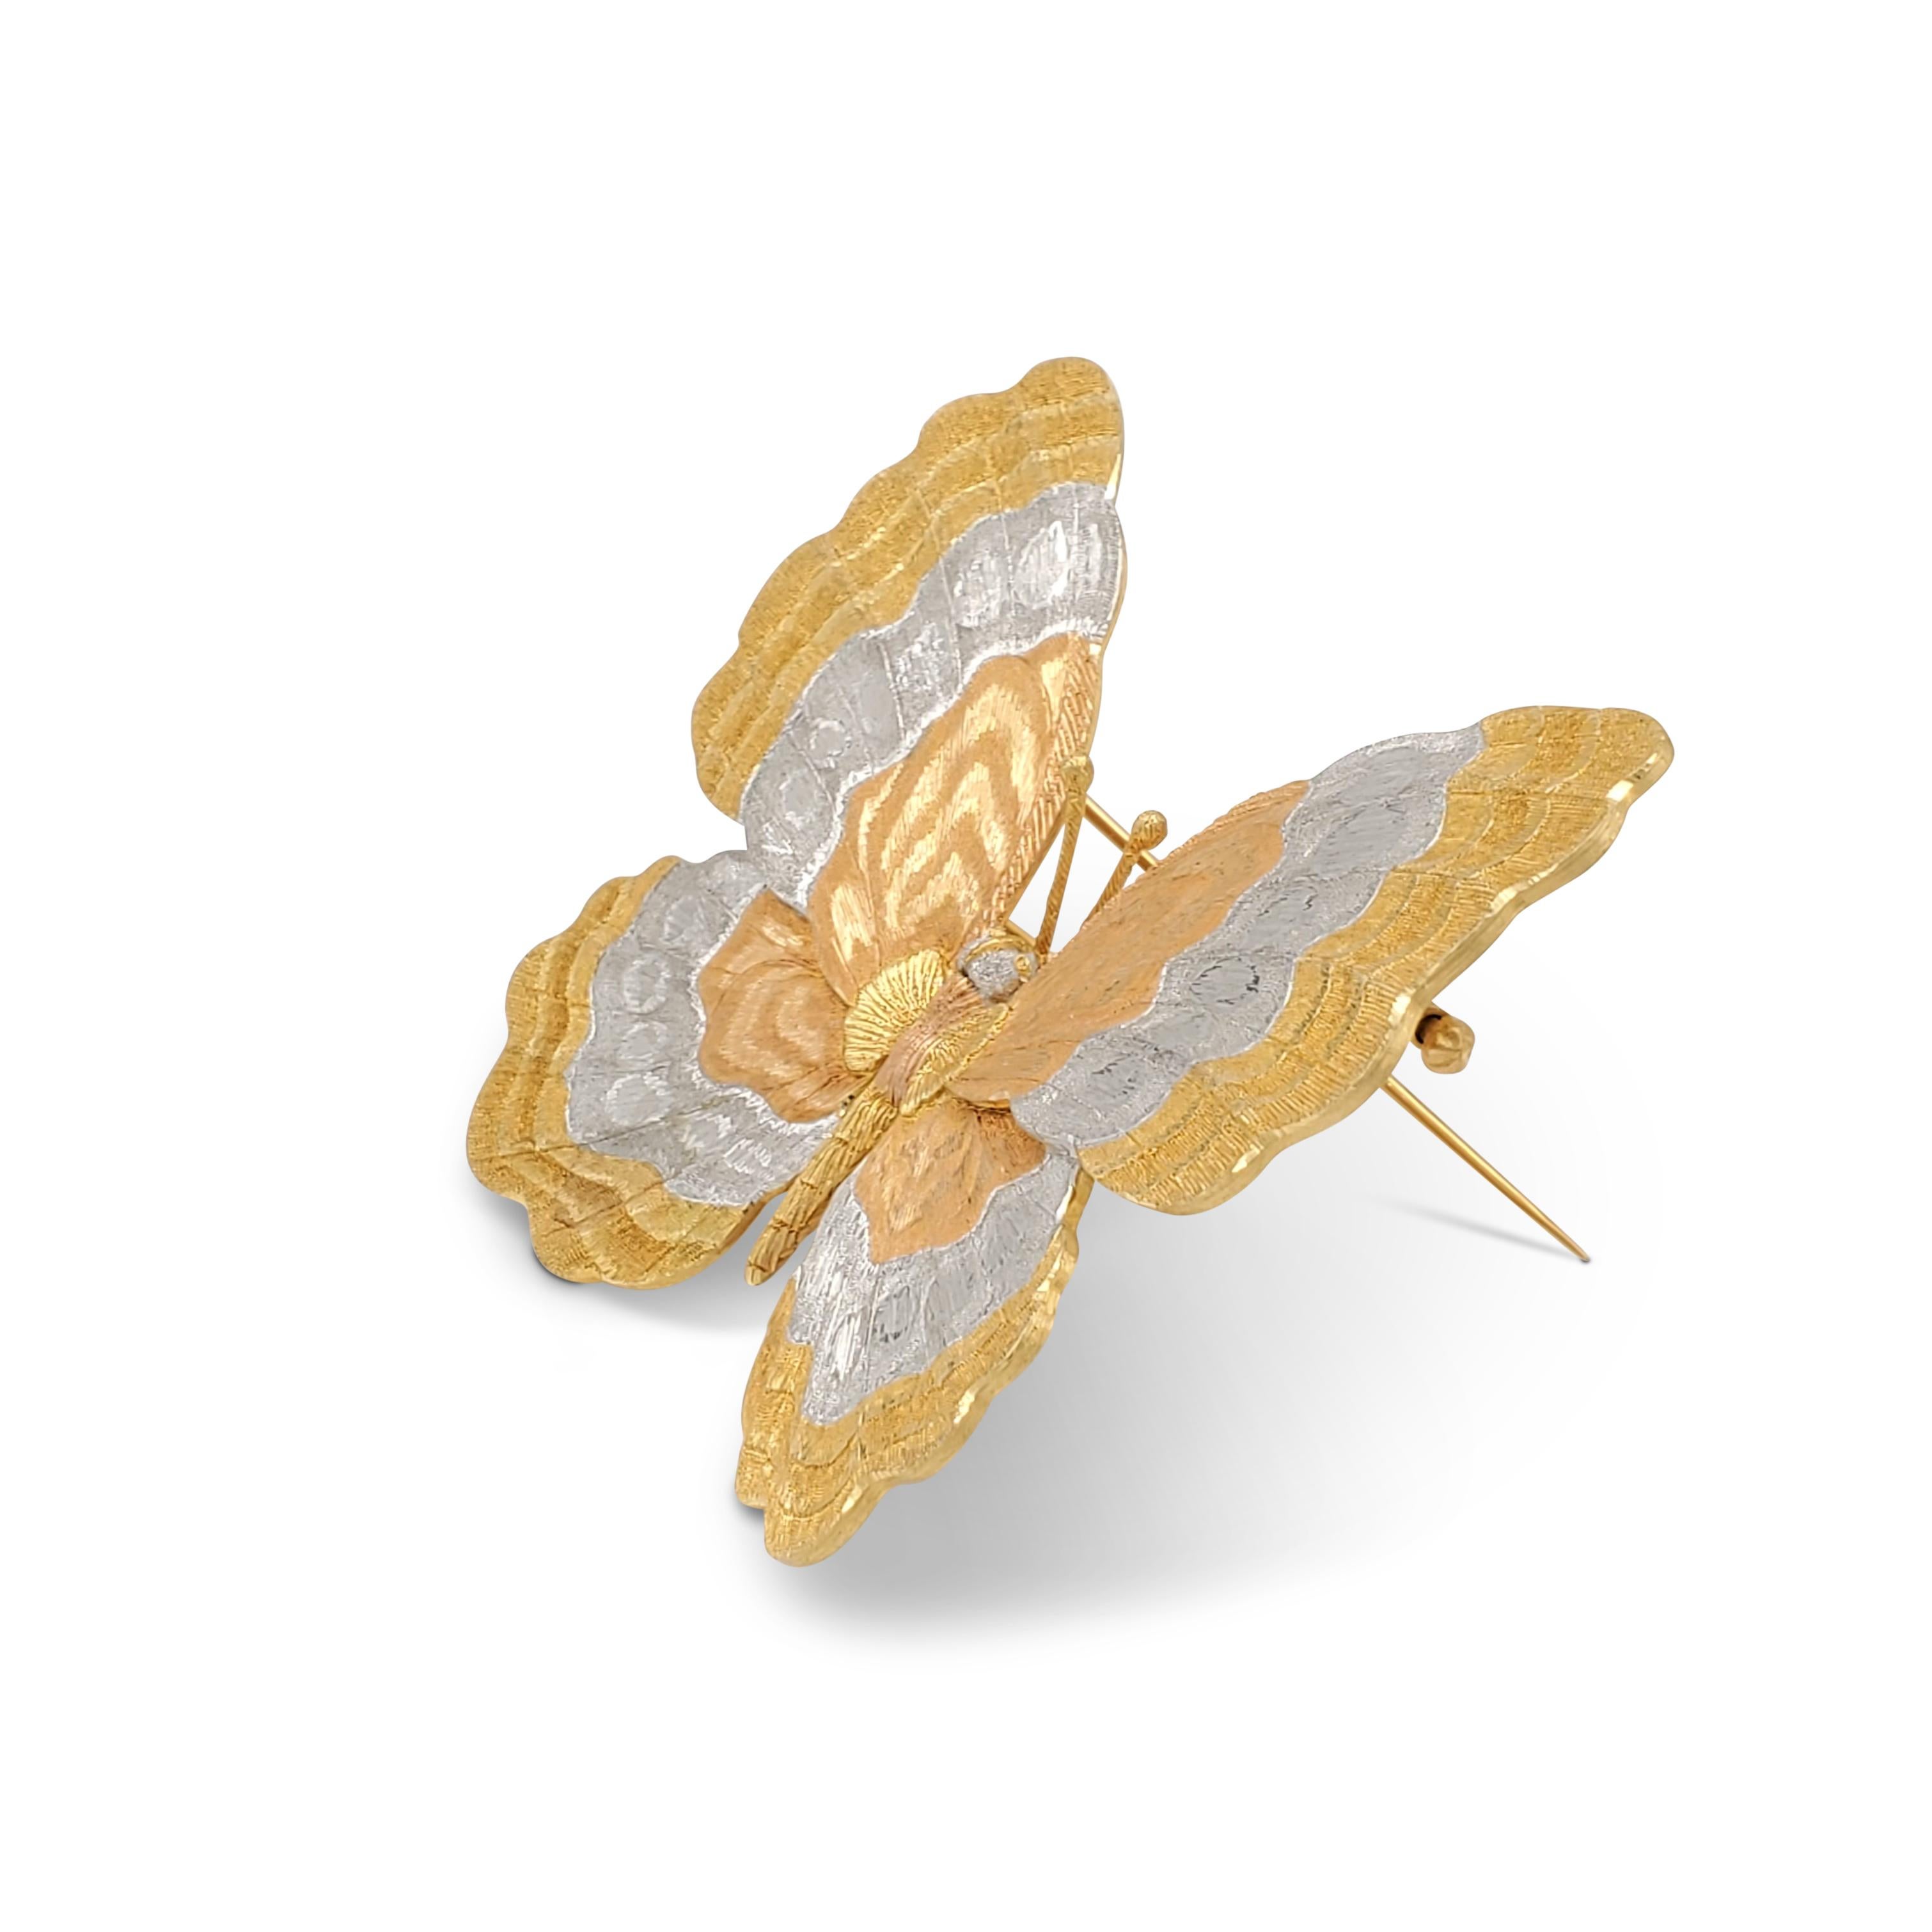 A stunning Buccellati brooch crafted in 18 karat yellow, rose, and white gold.  The intricate butterfly design comes to life in the exquisitely brushed pattern of the wings.  The brooch measures 2 1/4 inches in length and 2 1/4 inches at the widest